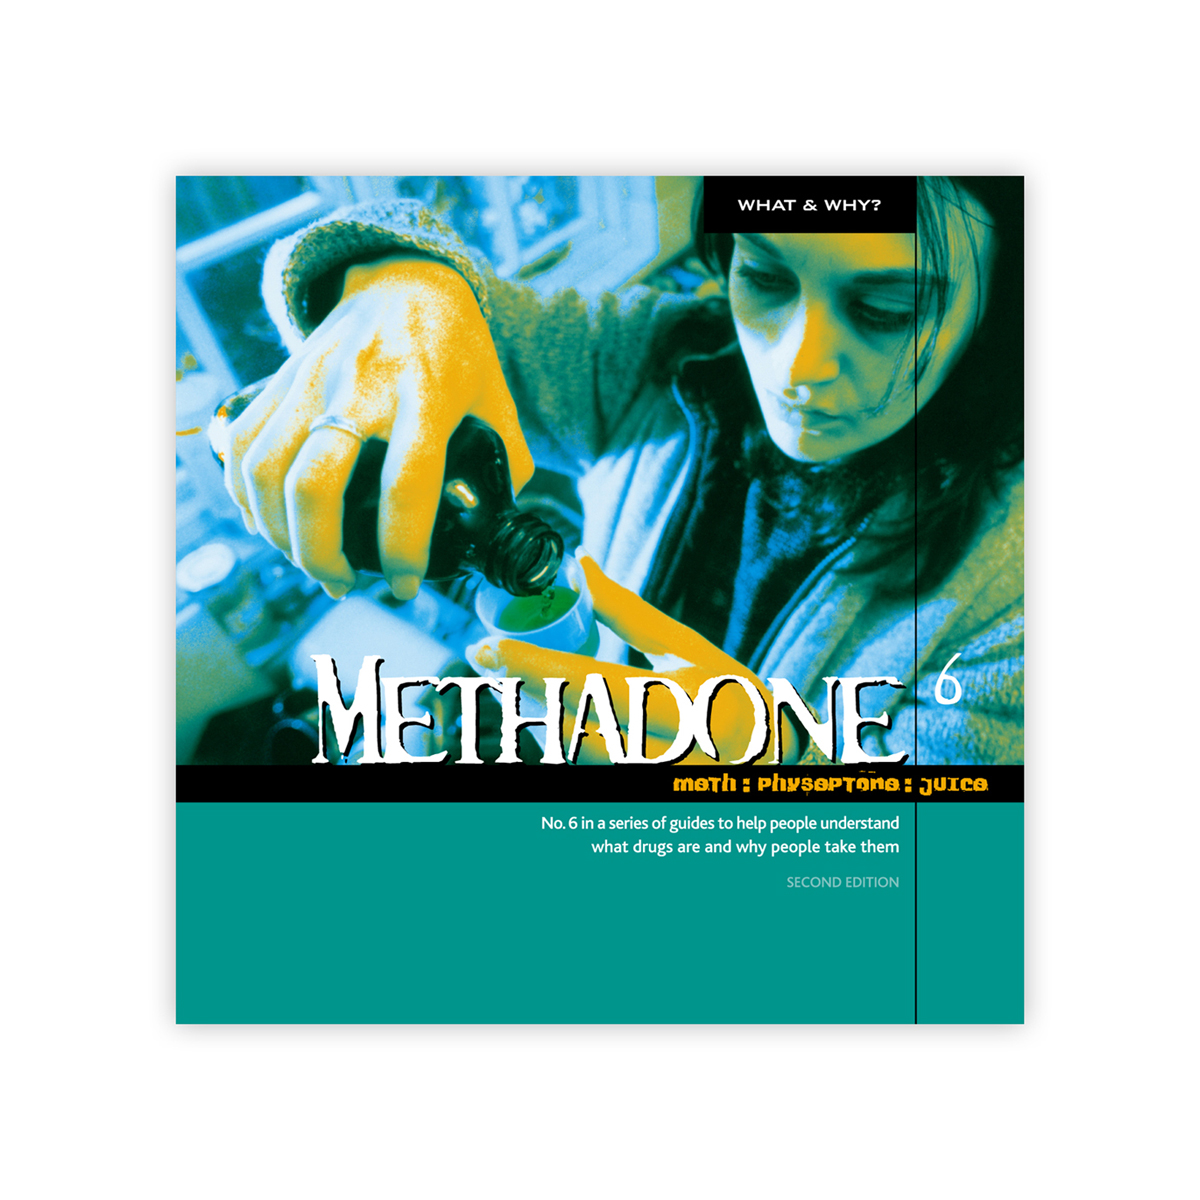 What & Why? 6: Methadone